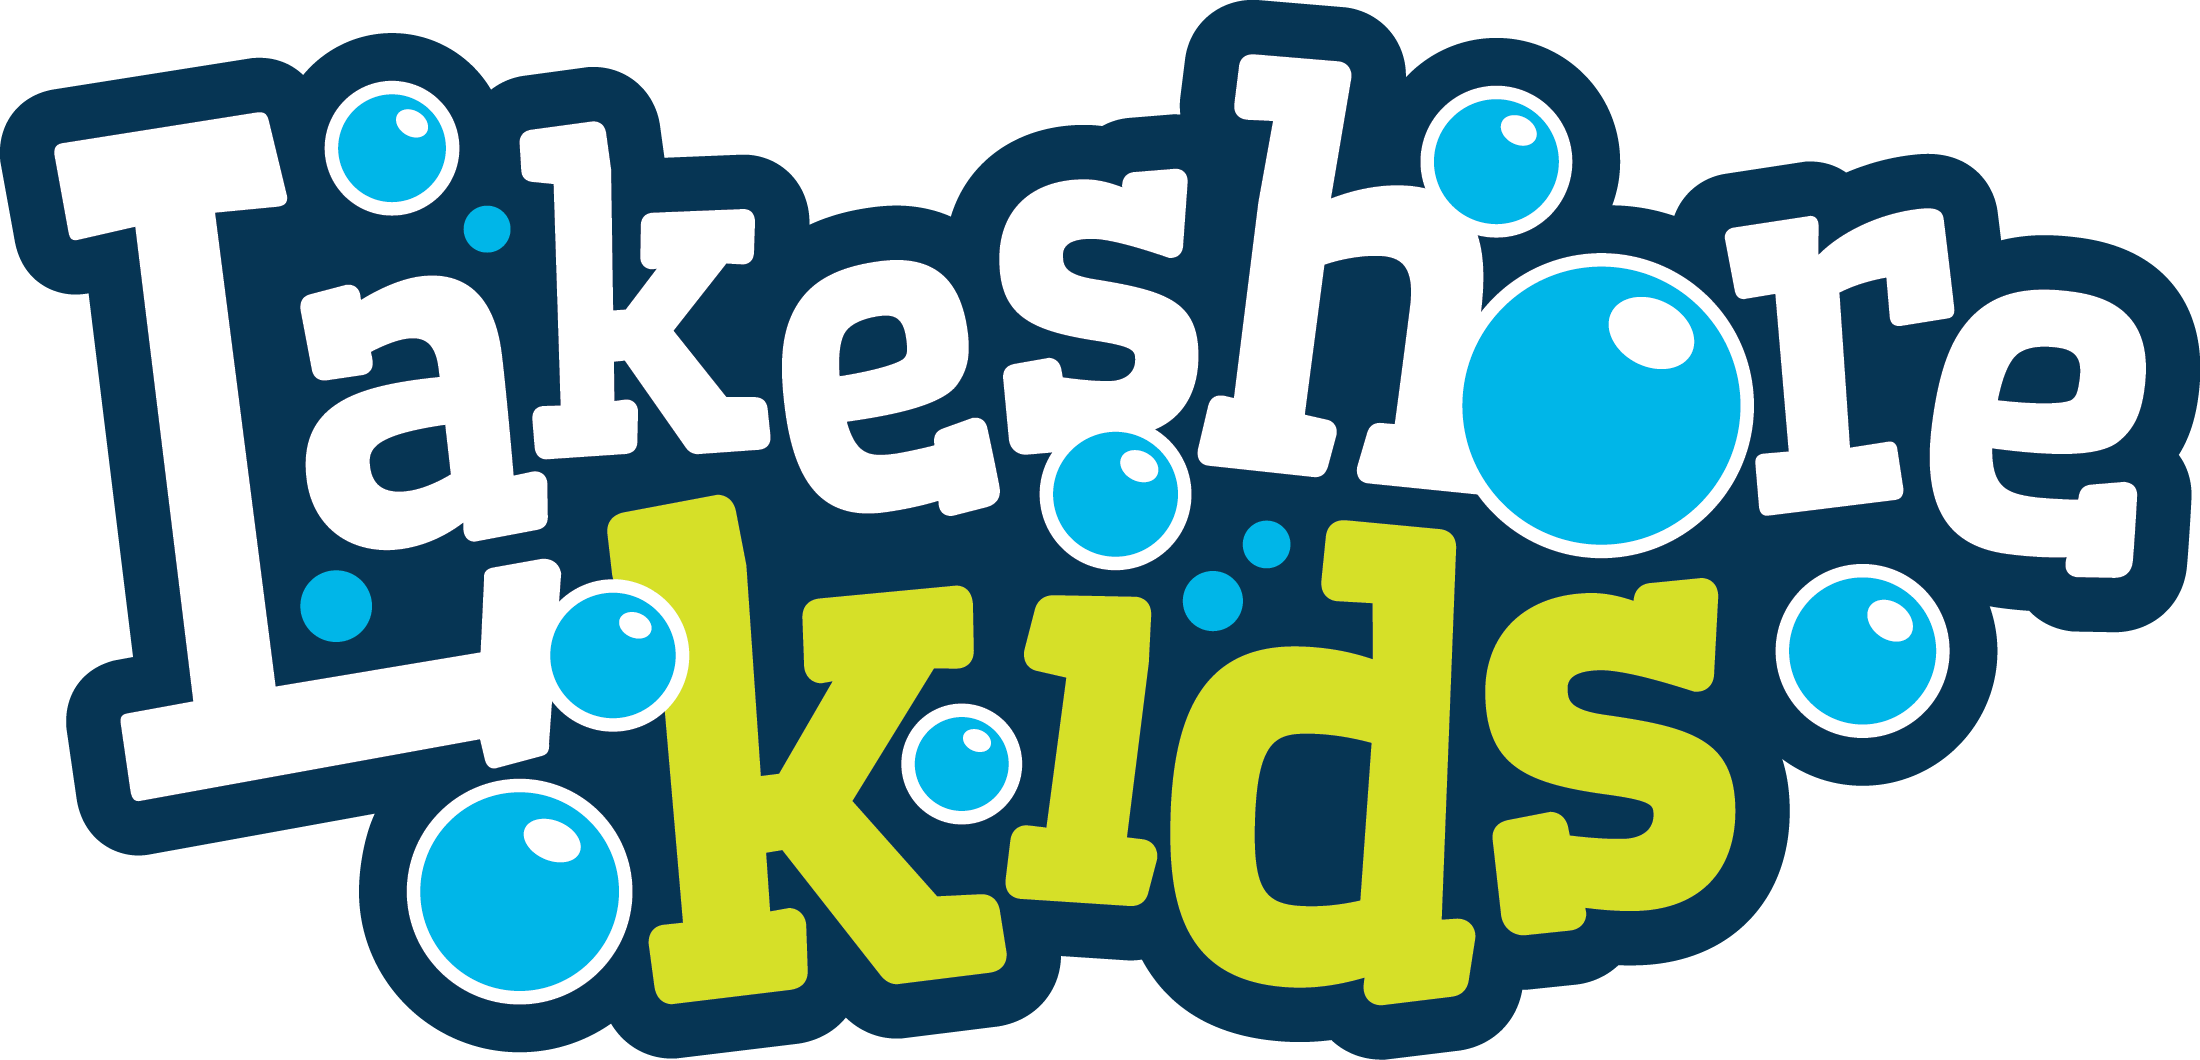 Lakeshore Kids helps kids discover and develop a growing relationship with Jesus Christ.